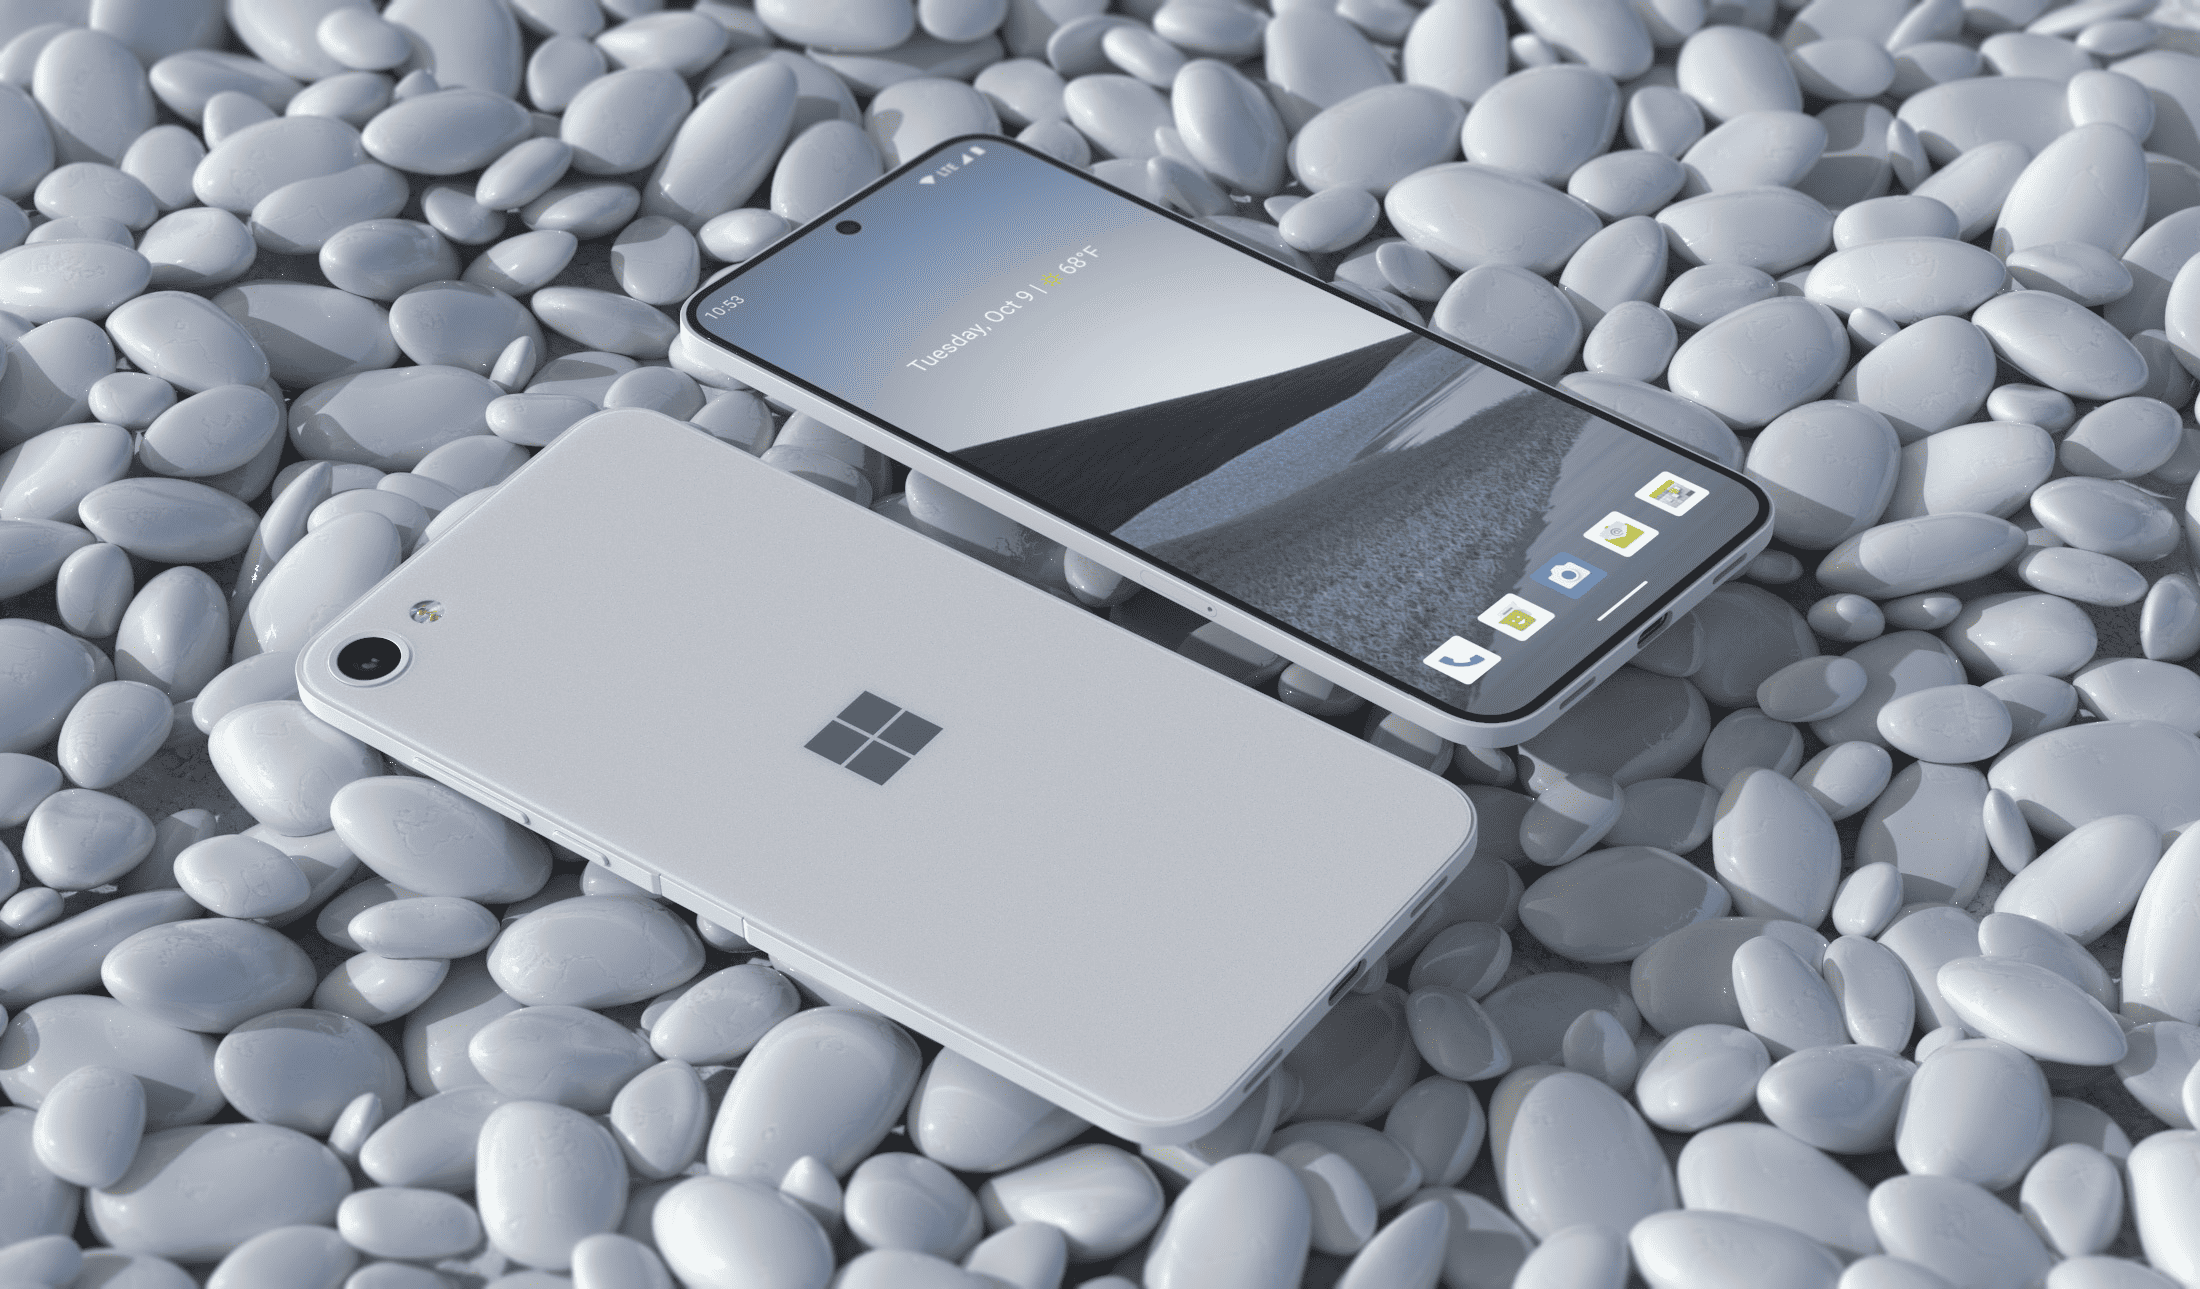 Surface Solo is the cool concept Surface phone with a single screen